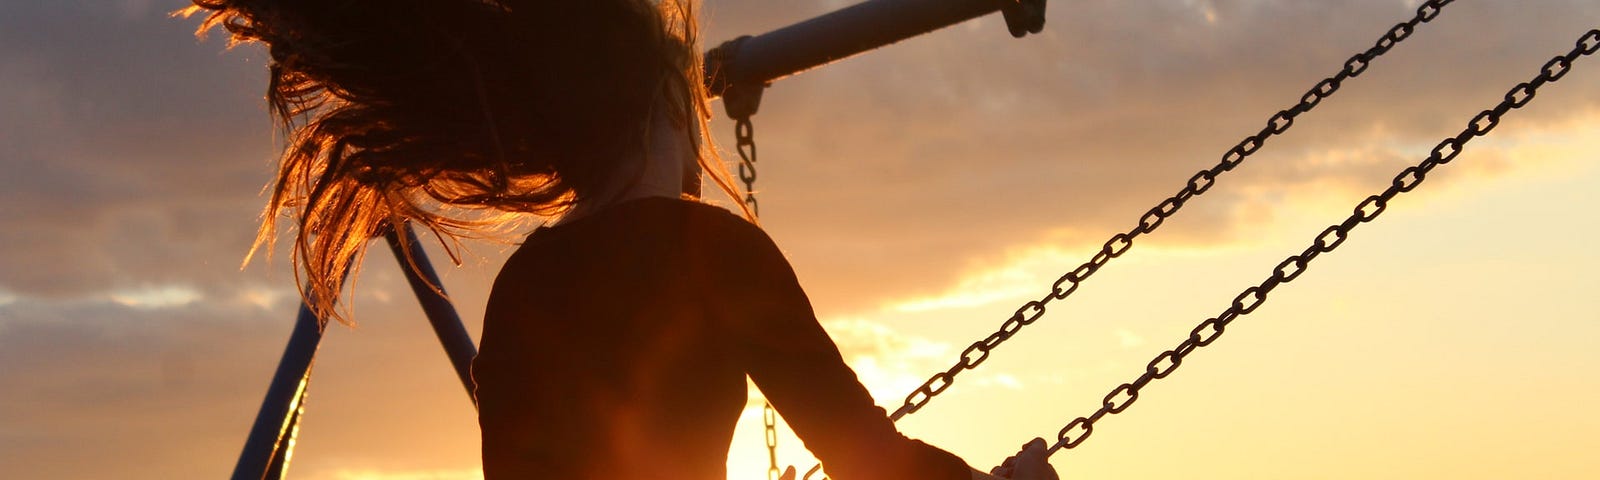 Photo of a person on a swing, their long hair trailing behind them as they swing. The background is a sunset along above the water.